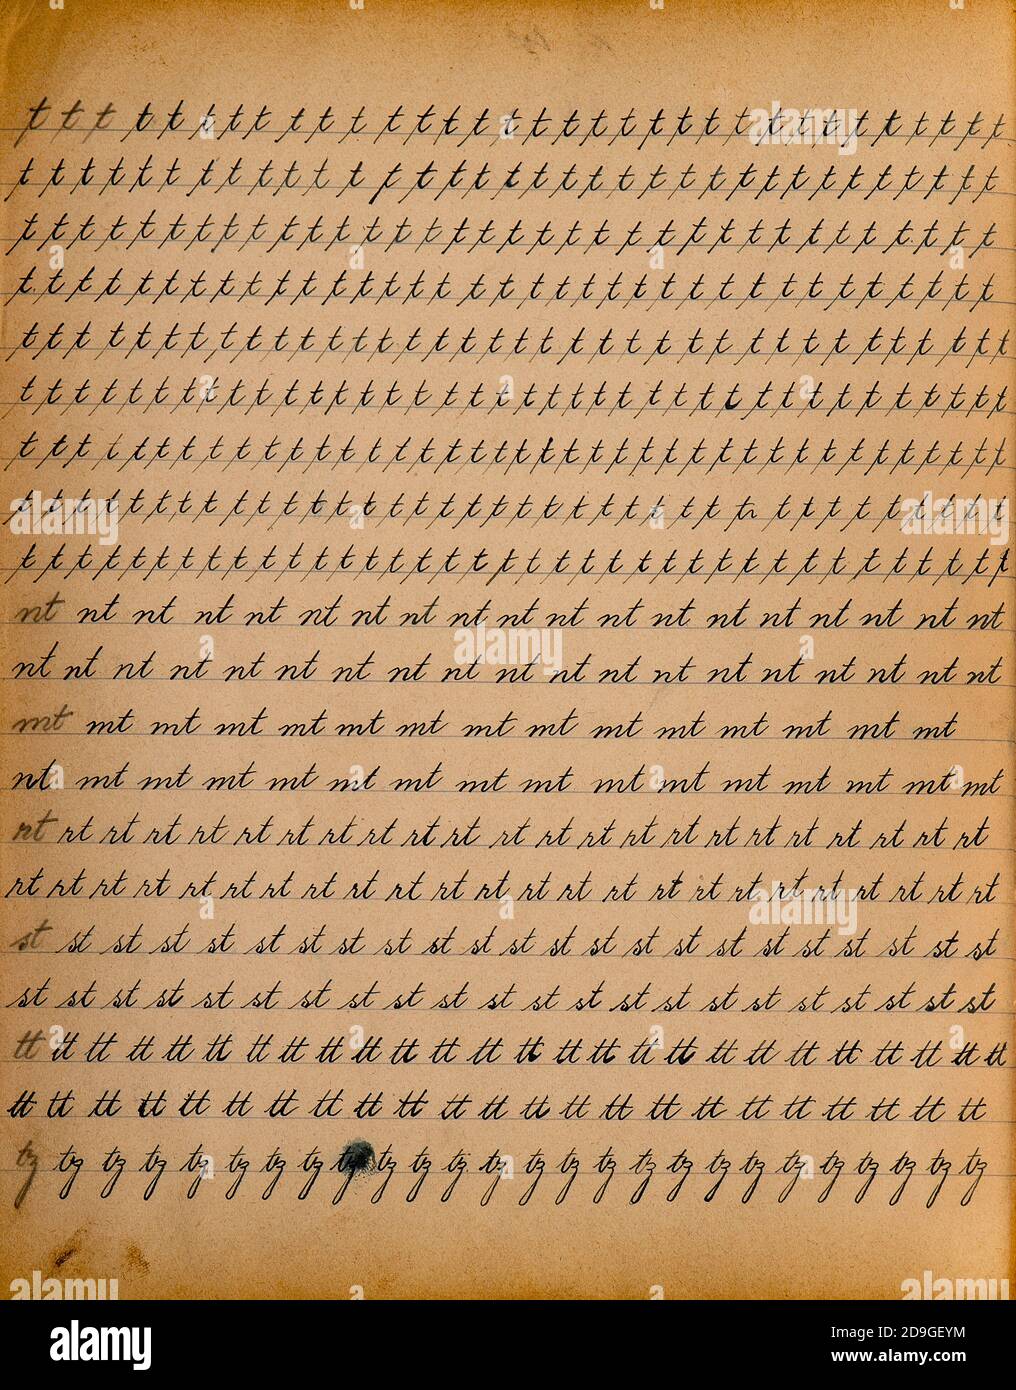 Calligraphic exercise book page. Old paper background texture Stock Photo